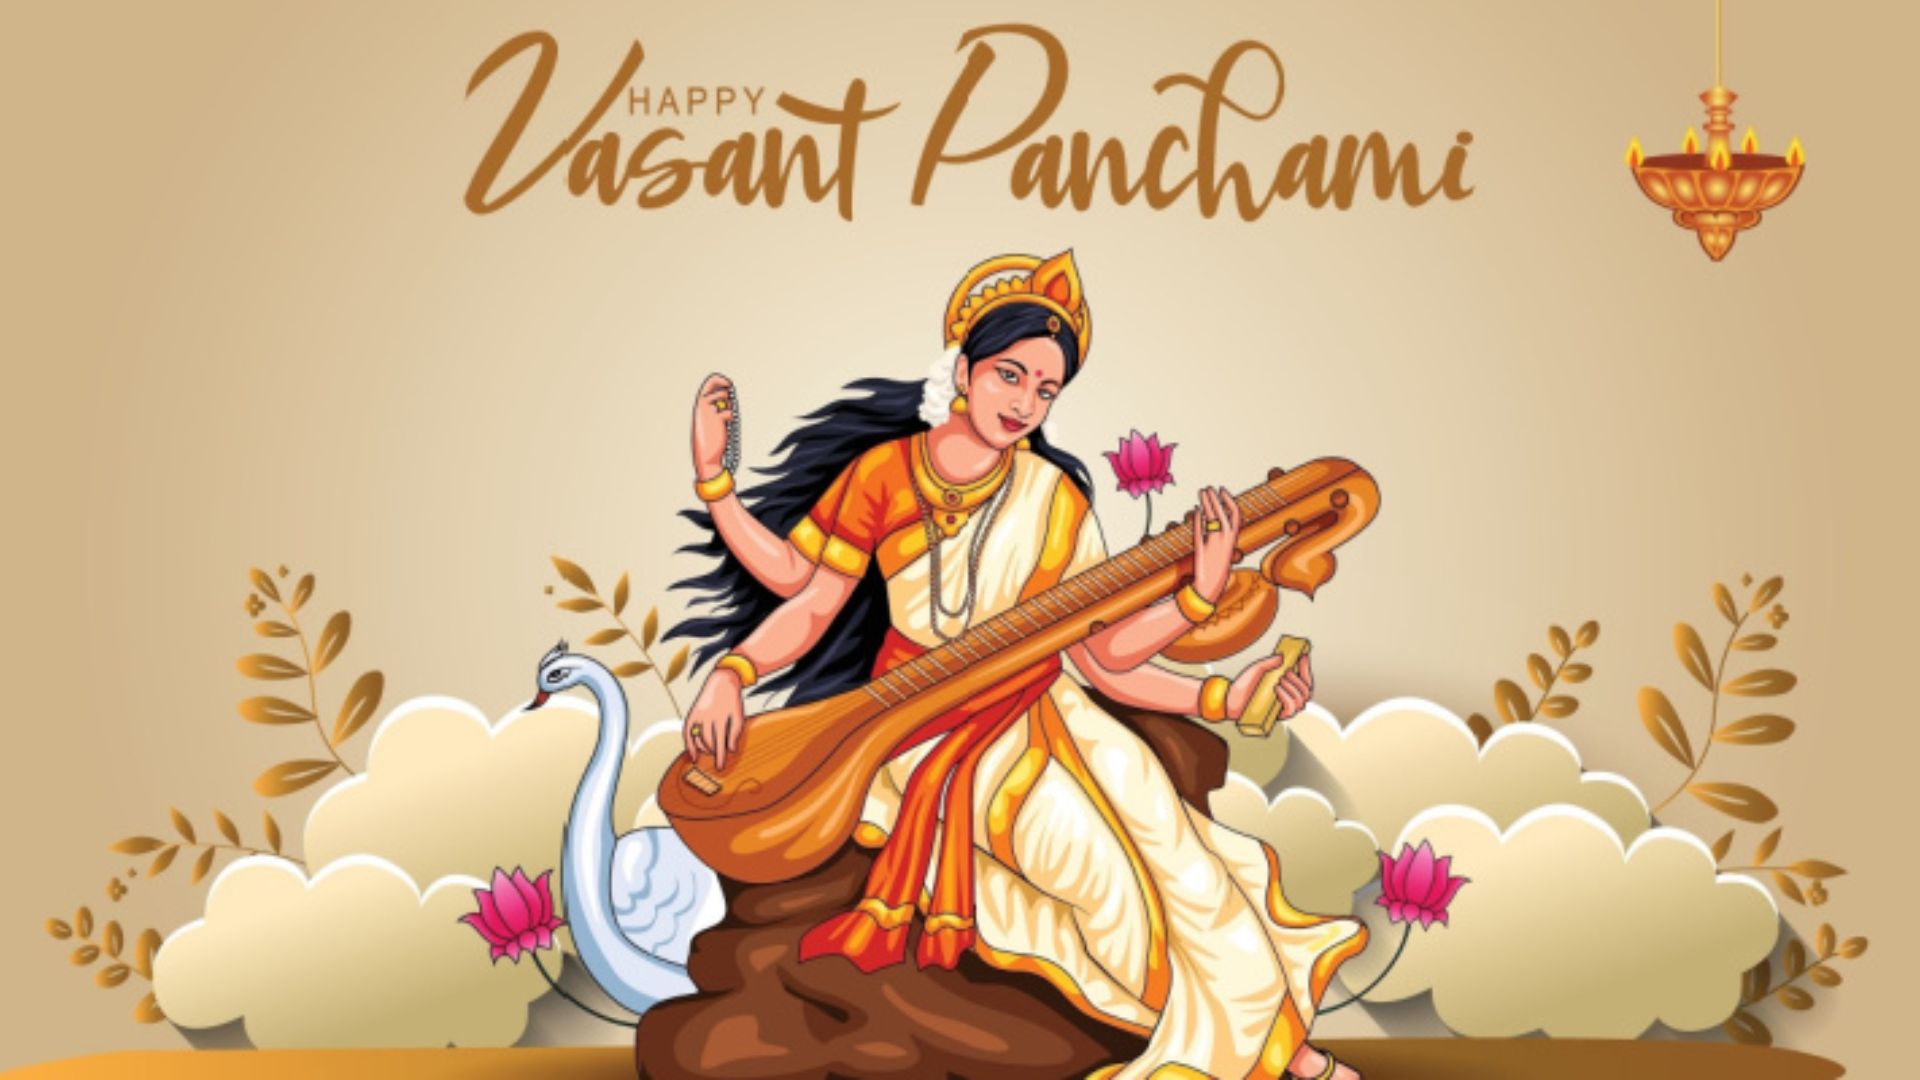 The holy festival of Vasant Panchami